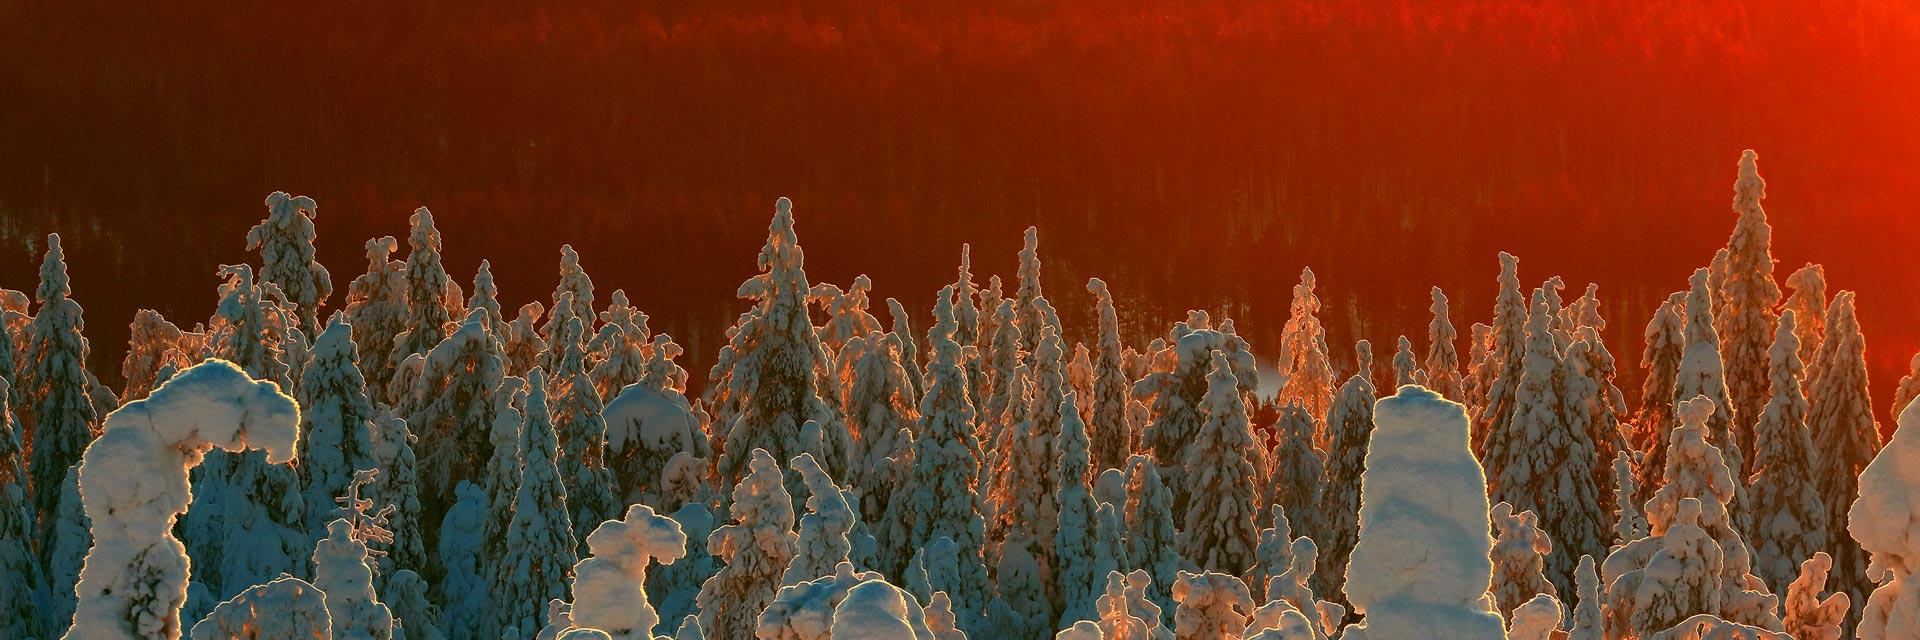 Snow-covered taiga forest in Finland.